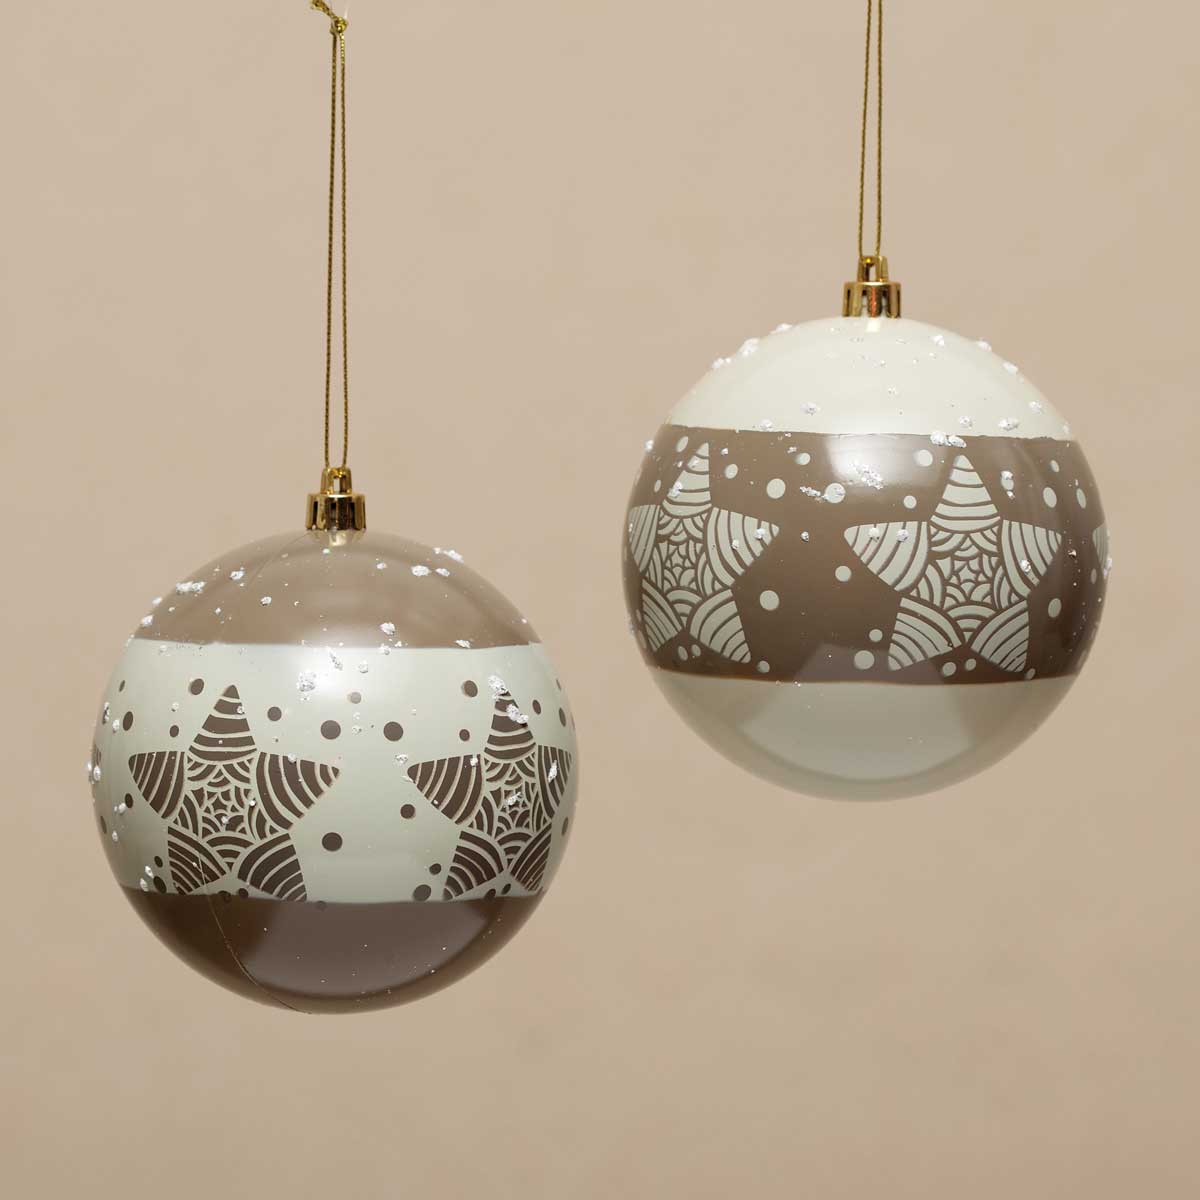 b70 ORNAMENT STAR BALL 2 ASSORTED 4IN - Click Image to Close